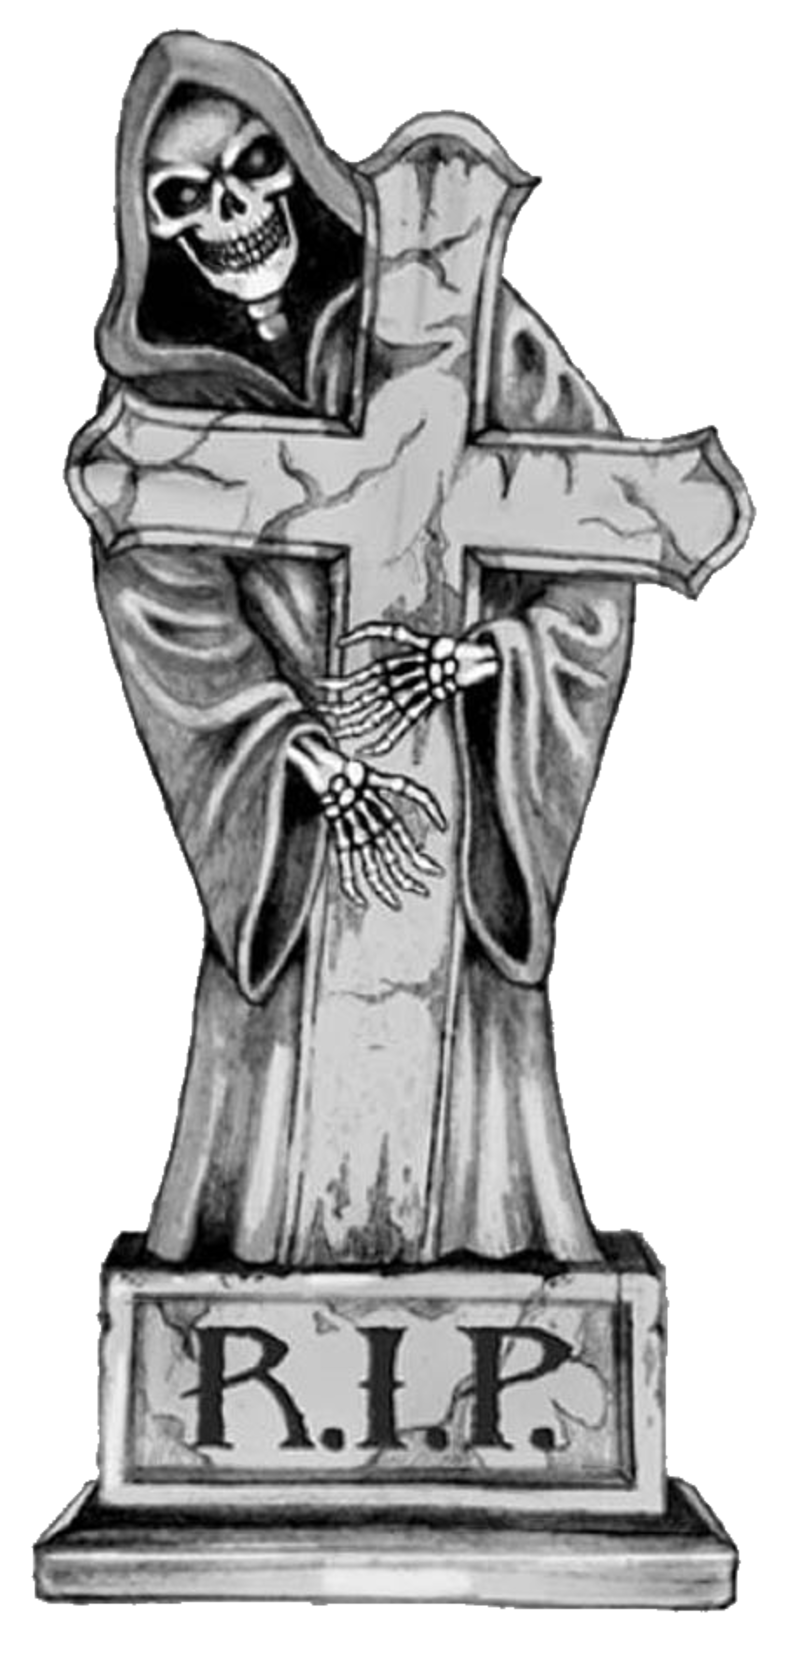 kisspng-headstone-death-statue-goth-subculture-rest-in-pea-sql-server-desired-enhancements-sql-rnnr-5bae9a67e2b801-7961954815381694479287.png